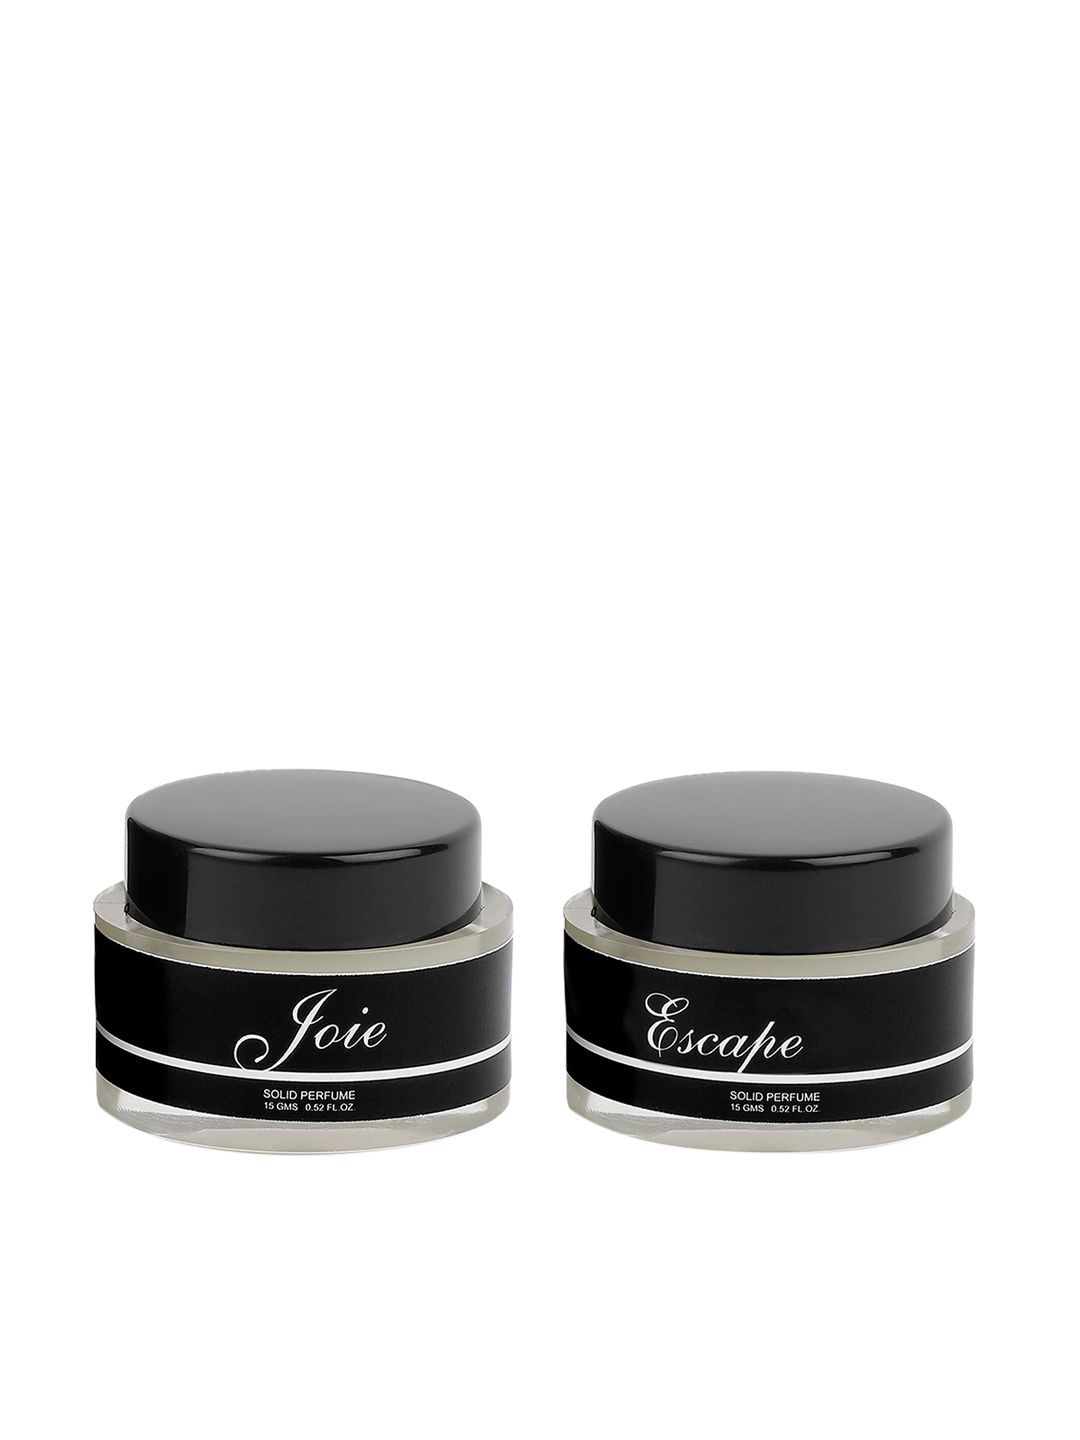 Fragrance & Beyond Men Set of 2 Joie Solid Perfume - 15g each Price in India